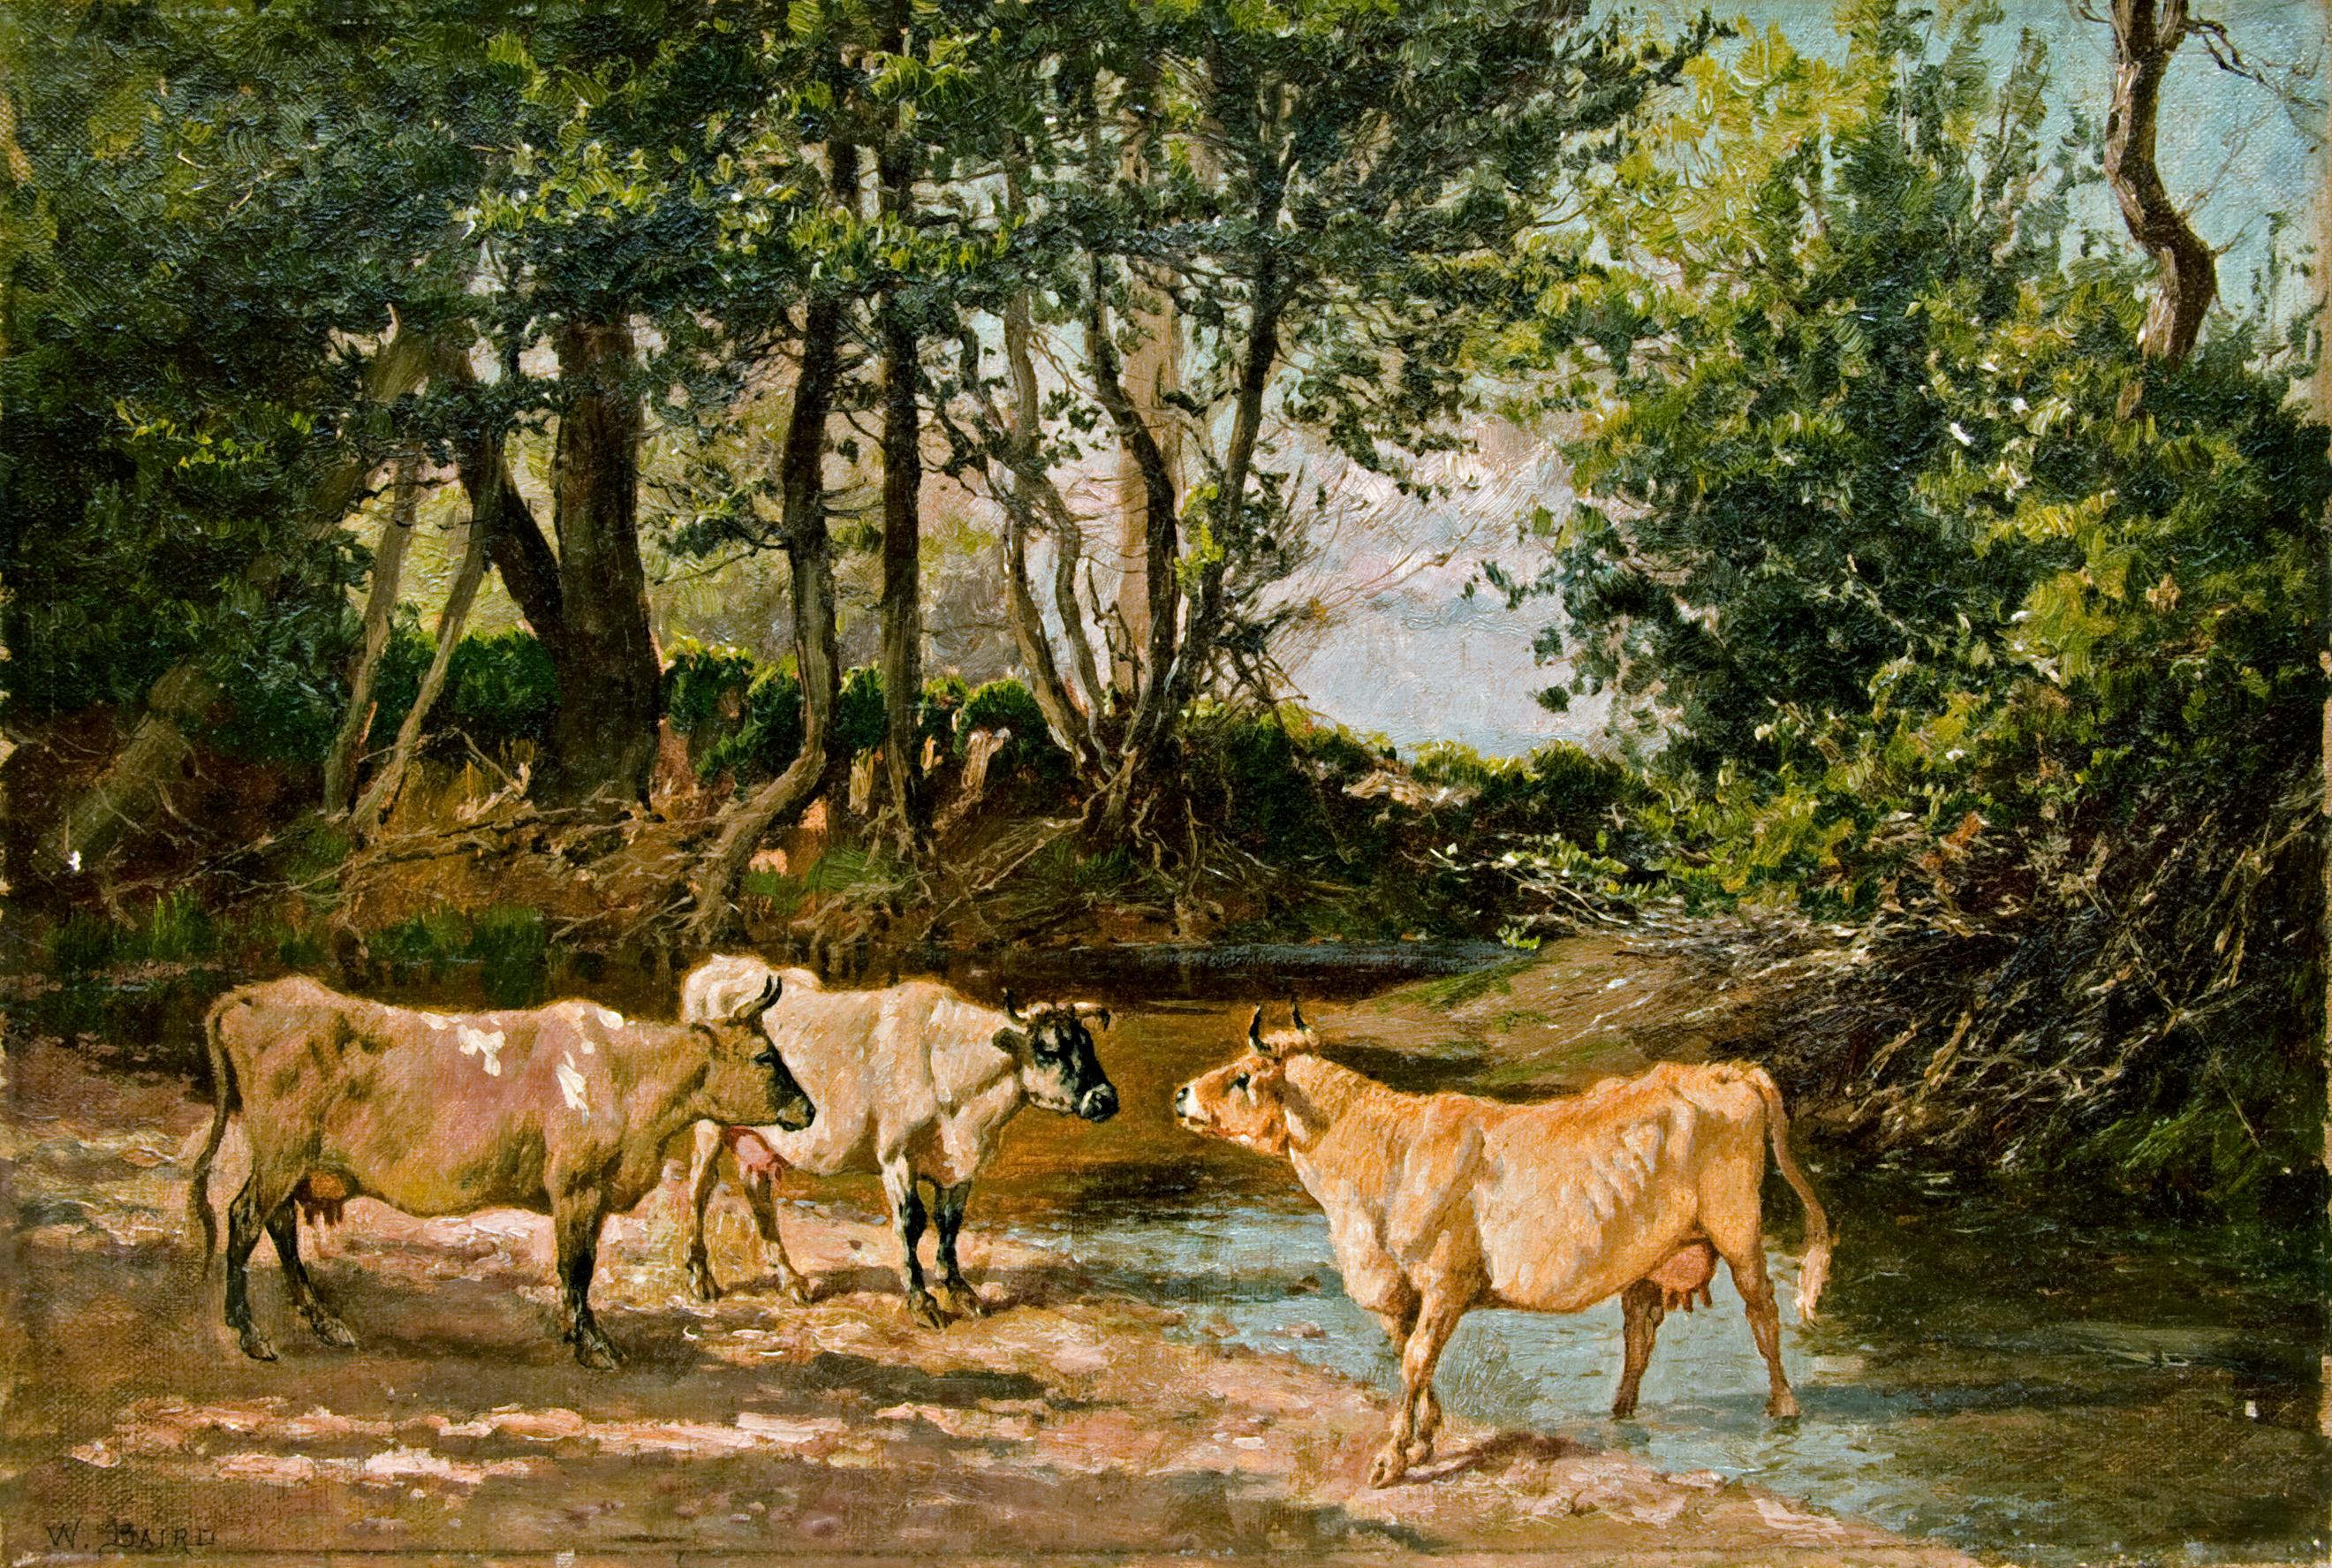 William Baptiste Baird Landscape Painting - 19th Century Cow Painting, by American Painter William Baird